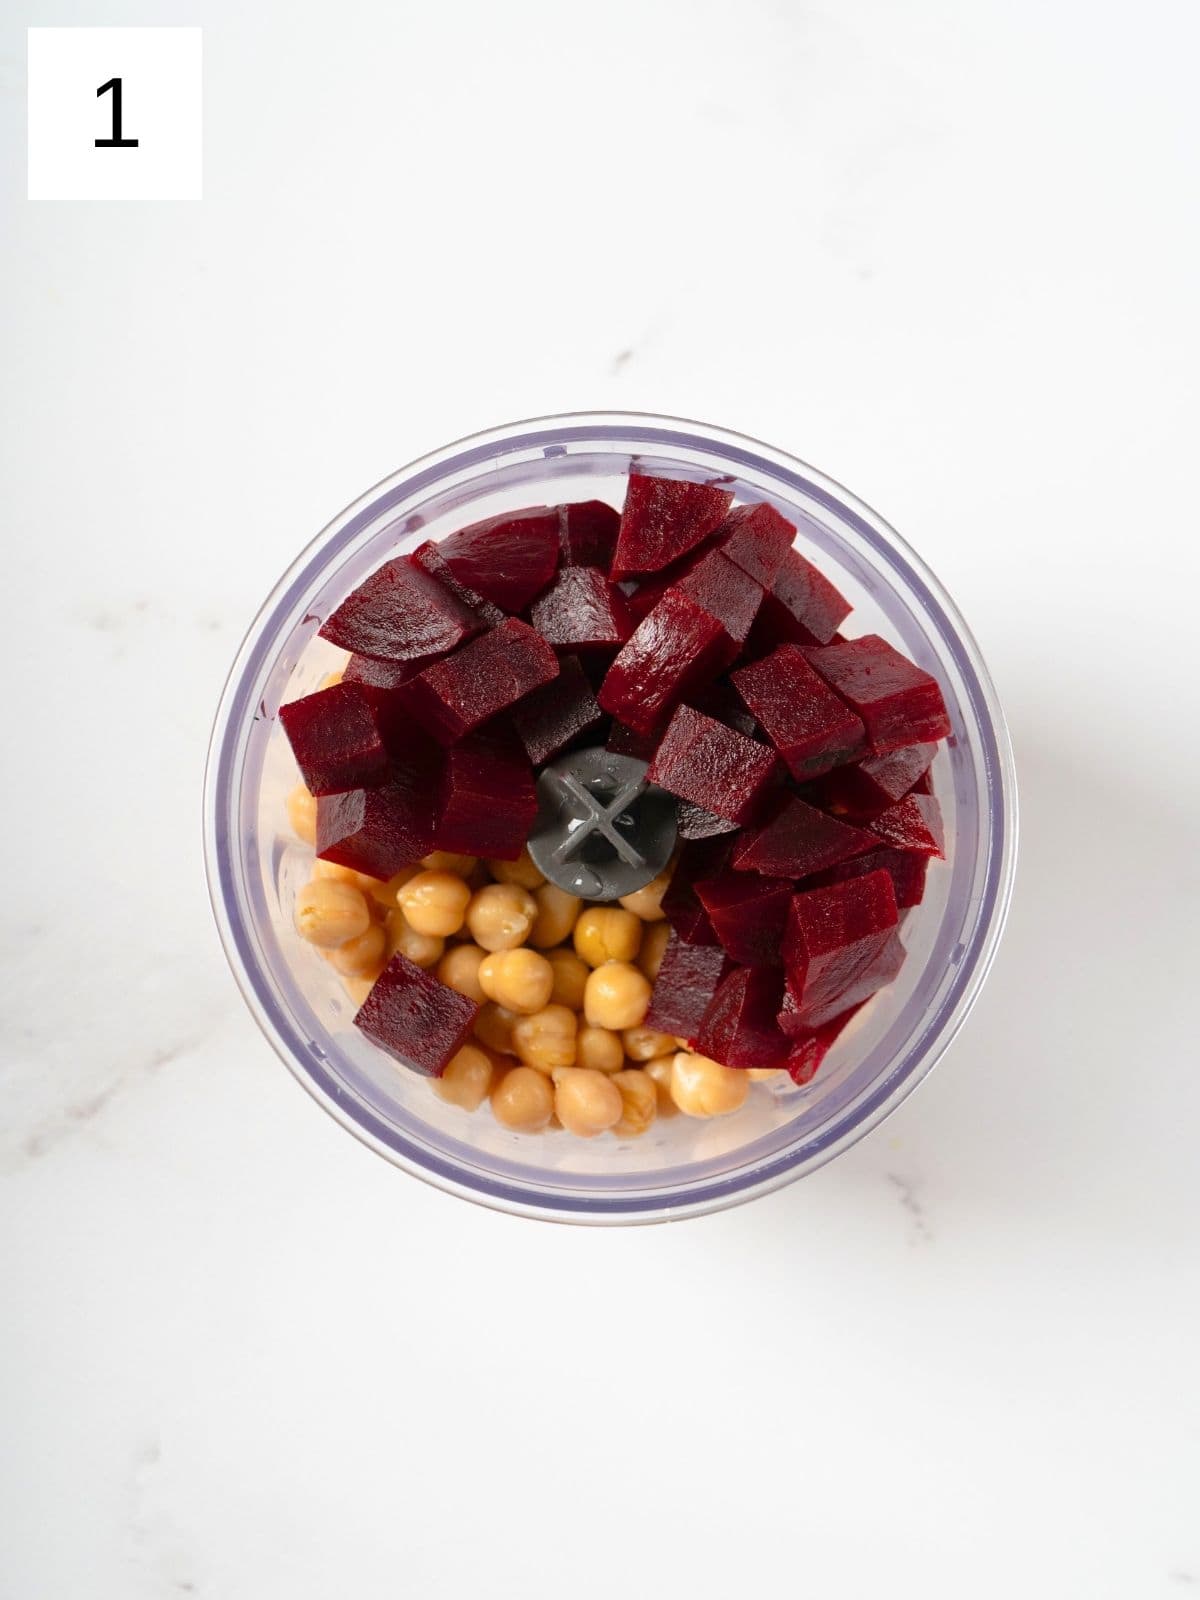 sliced beets and chickpeas in a food processor.